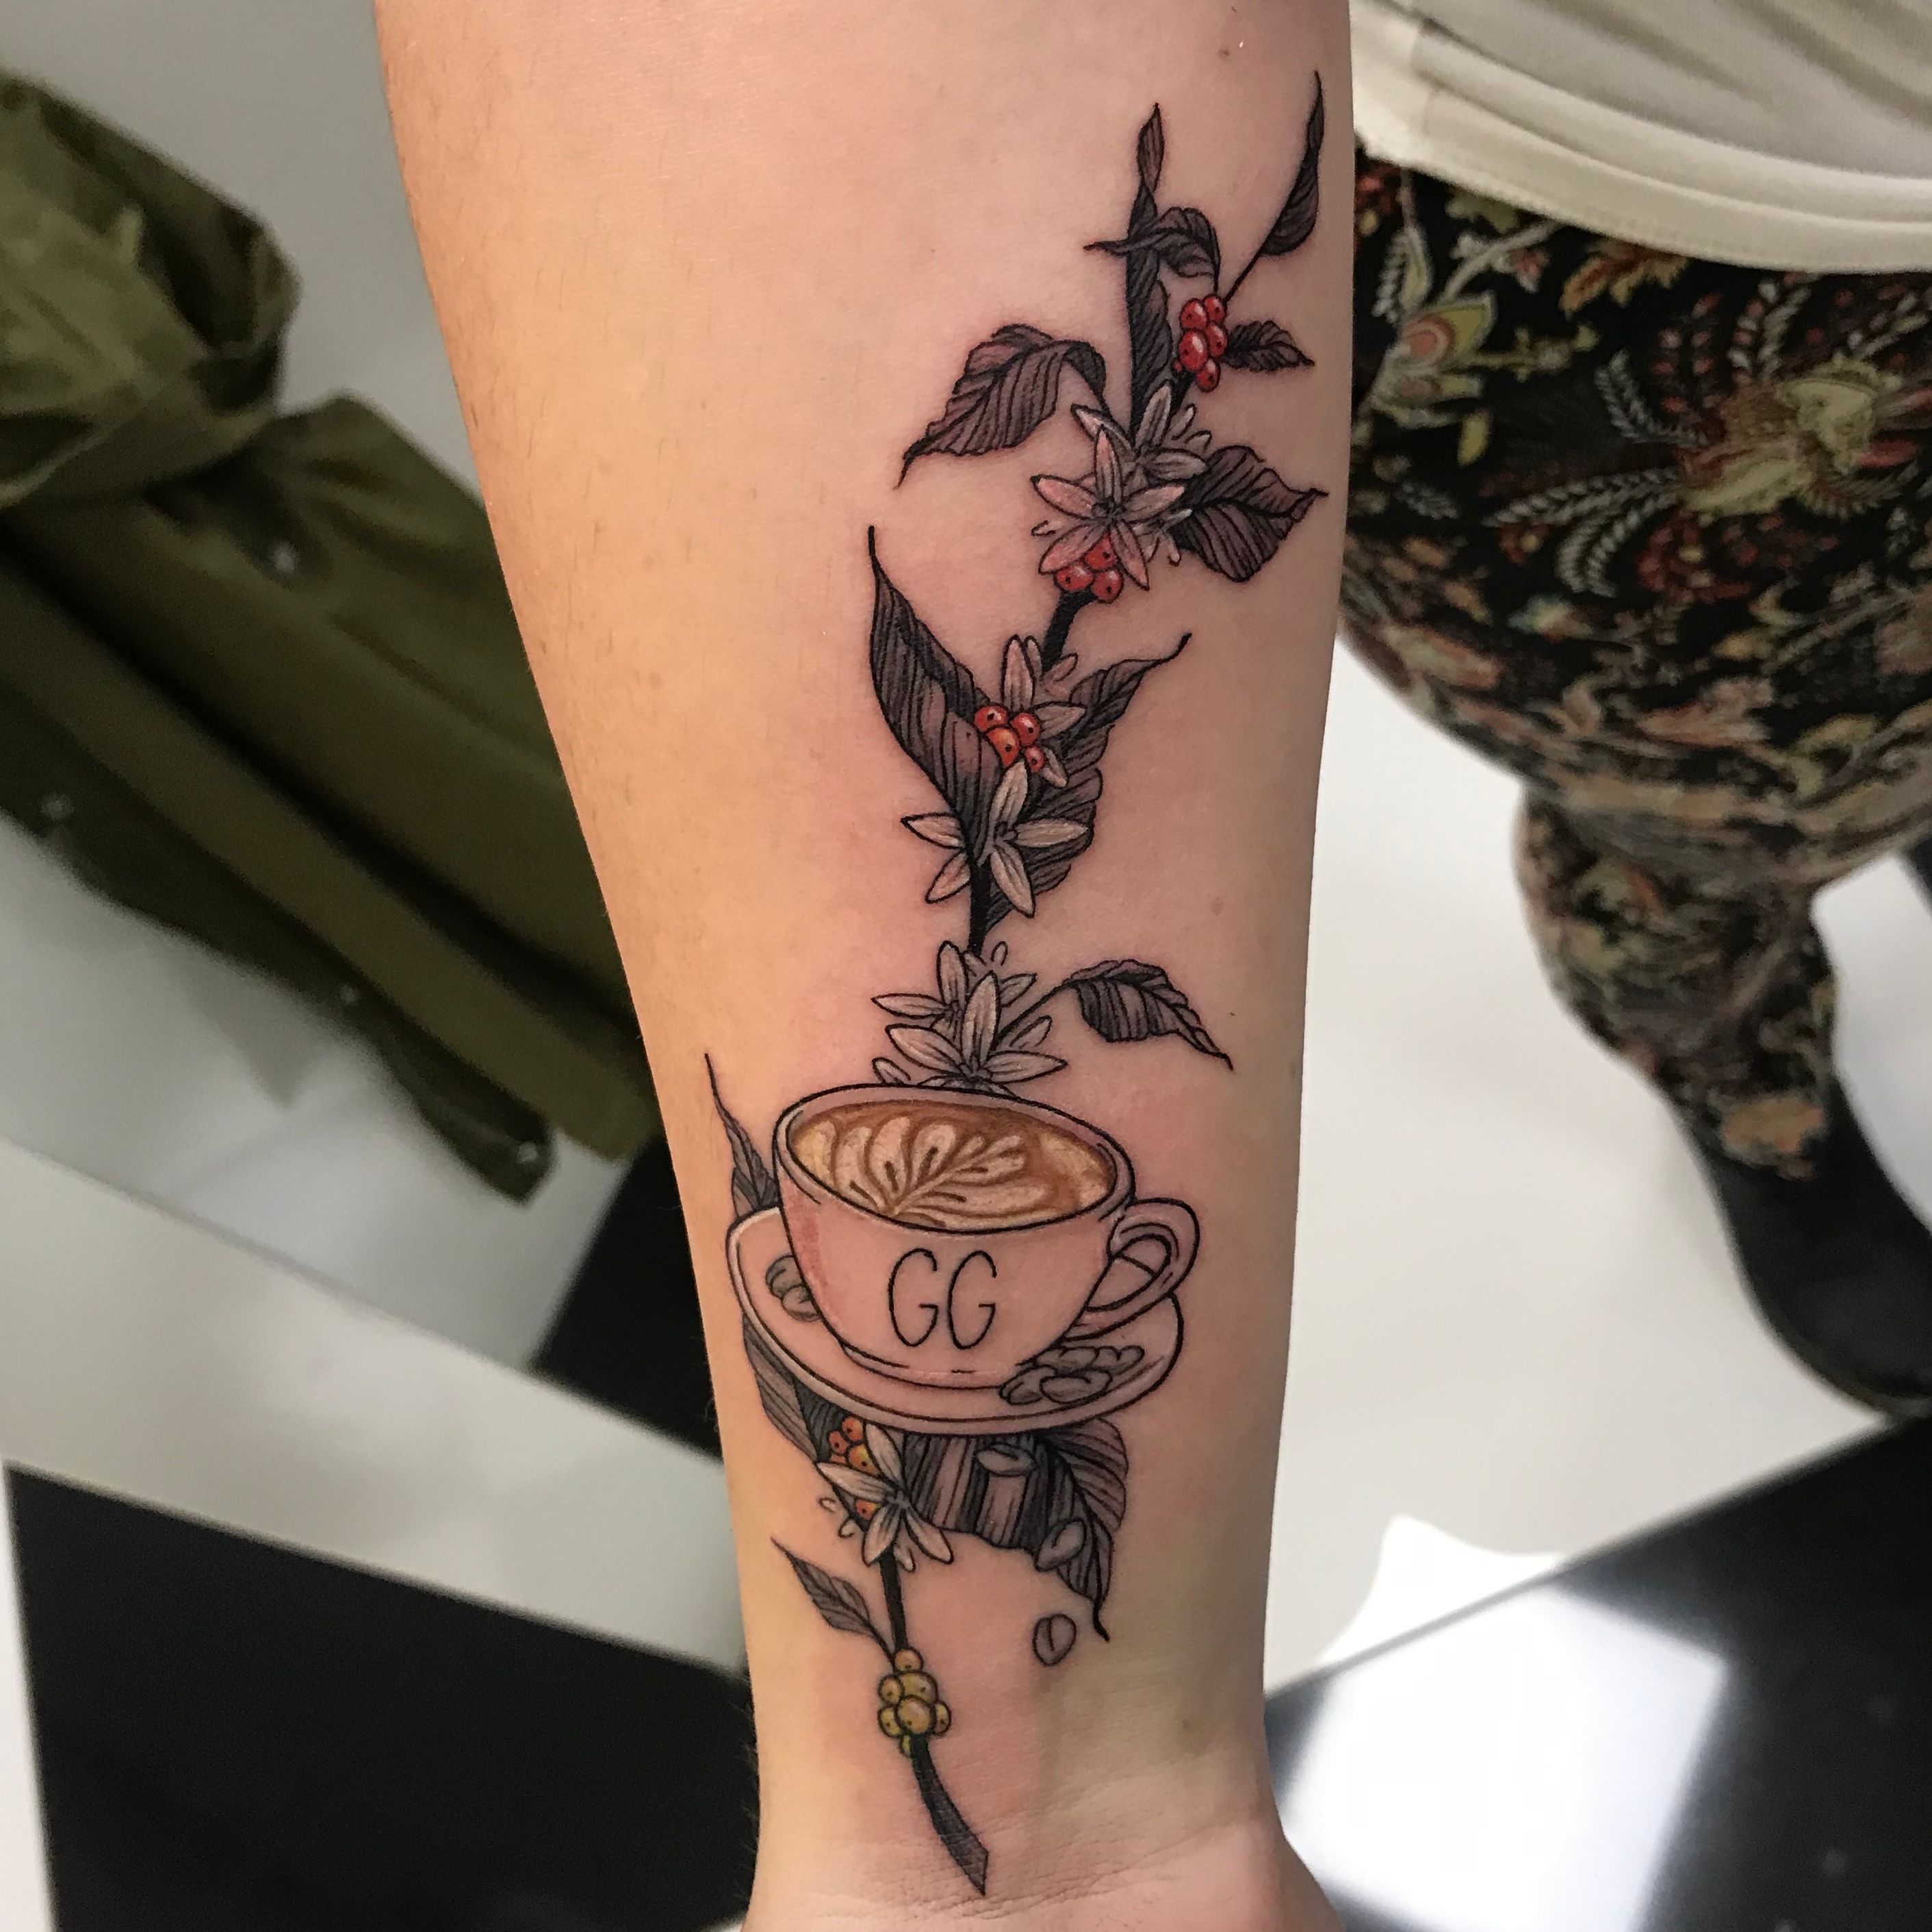 My coffee plant tattoo done by Alisha Rice formerly at Think Tank Tattoo  Now at Tattoo Dumond in Denver CO  rtattoos